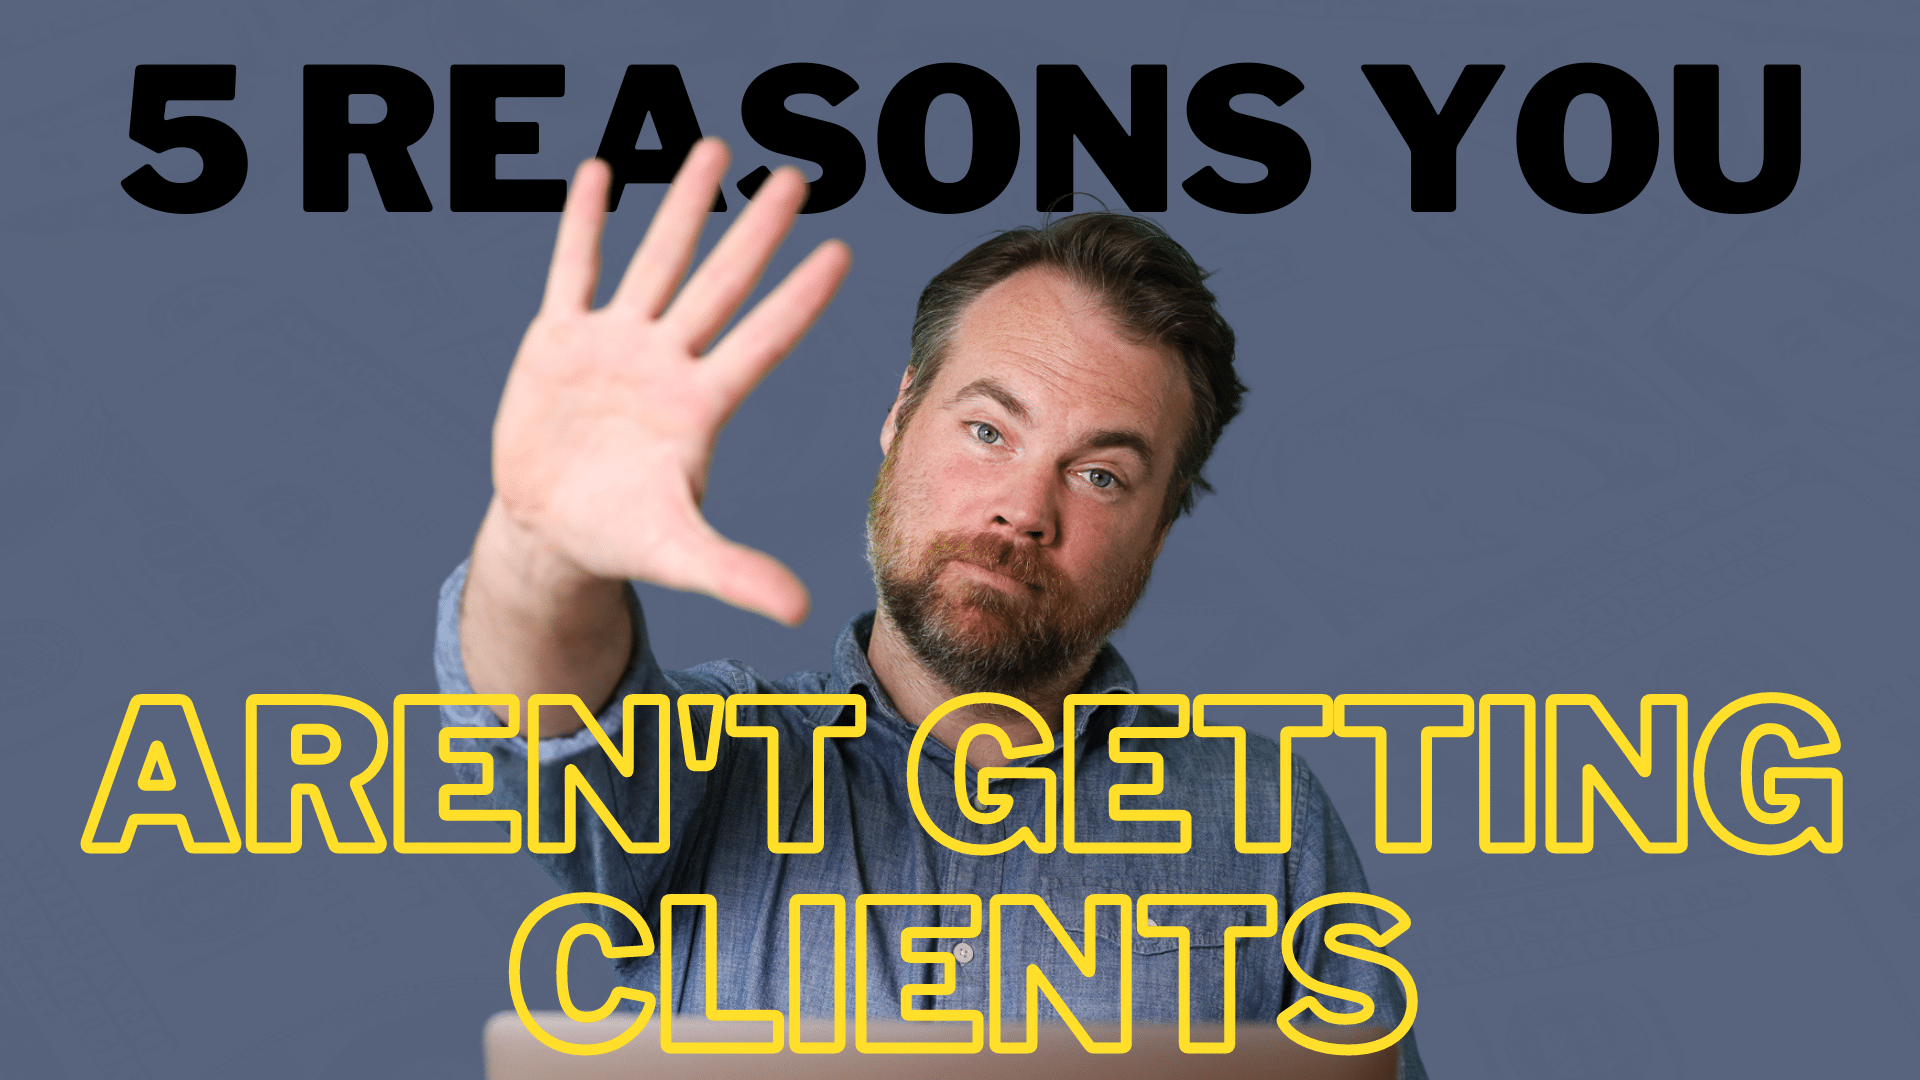 Freelance Writing Mistakes: 5 Reasons Why You Aren’t Getting Clients